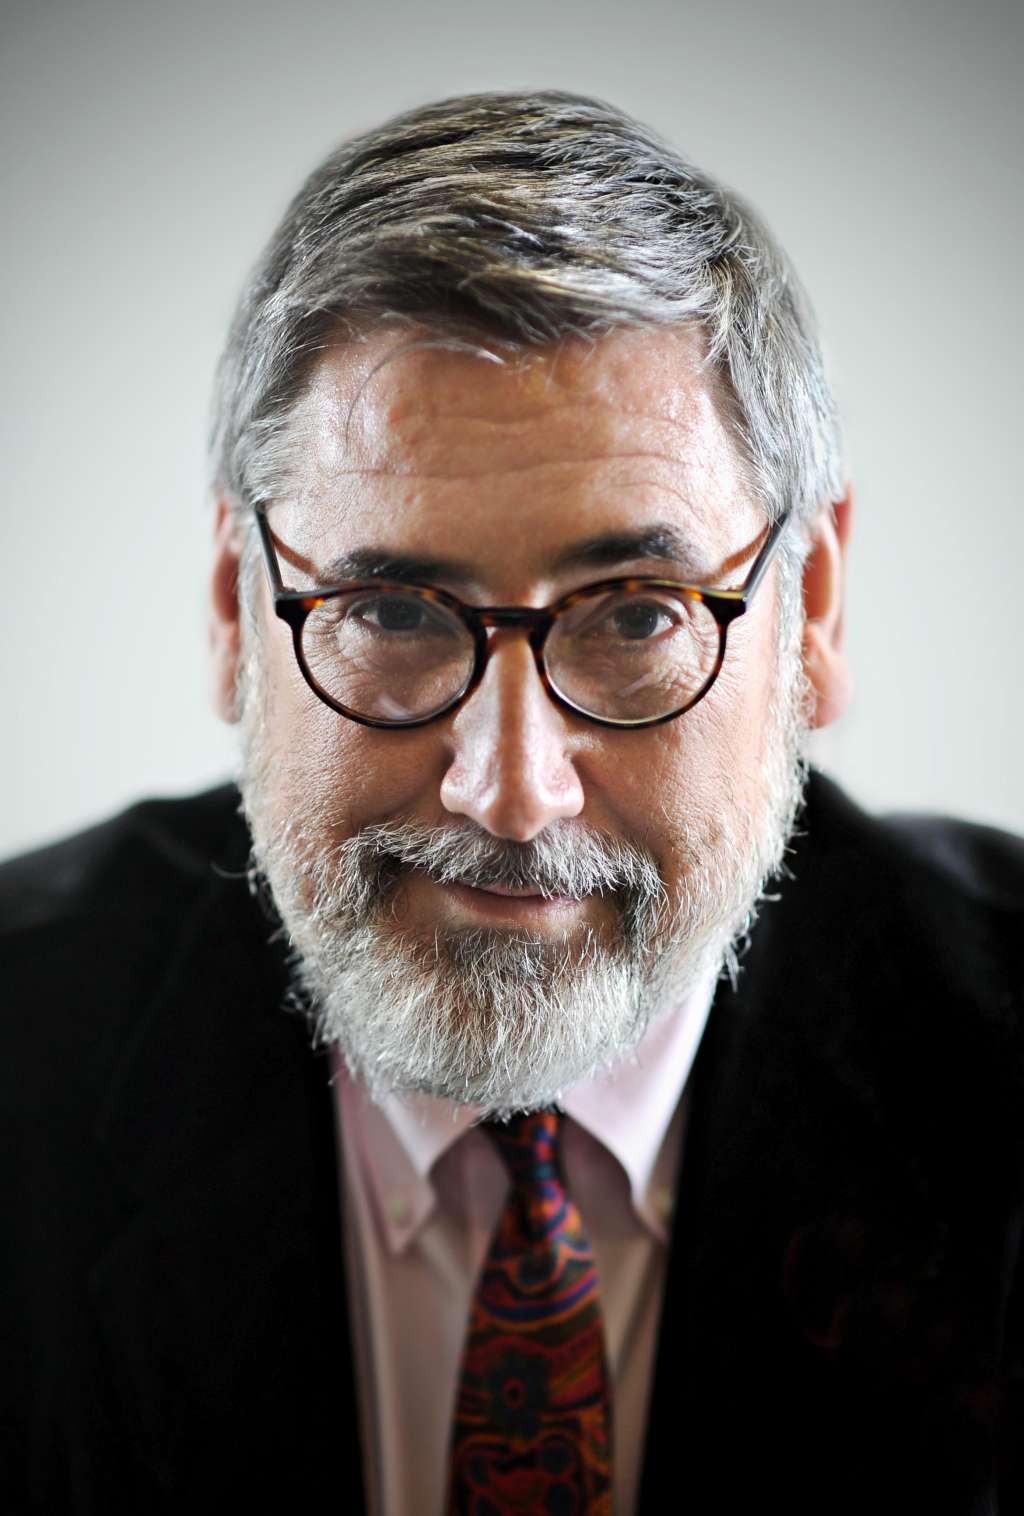 John Landis. Director John Landis was charged with involuntary manslaughter after an accident on the set of his film The Twilight Zone caused the deaths of actor Vic Morrow and two children, who were extras. Landis was later acquitted of the charge, but he paid 2 million to each of the families of the children who died.